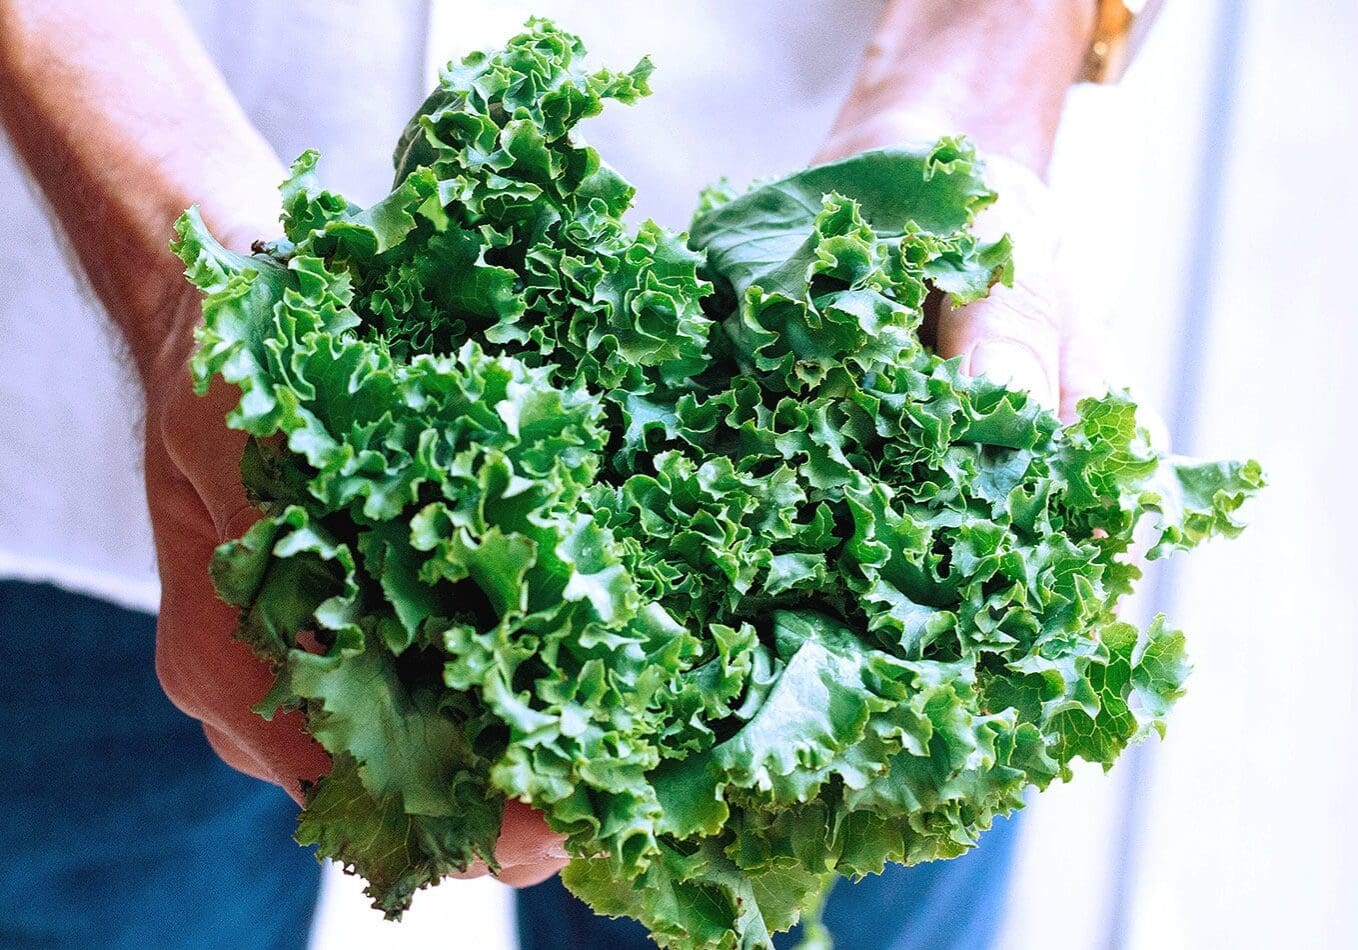 Get Your Leafy Greens On!